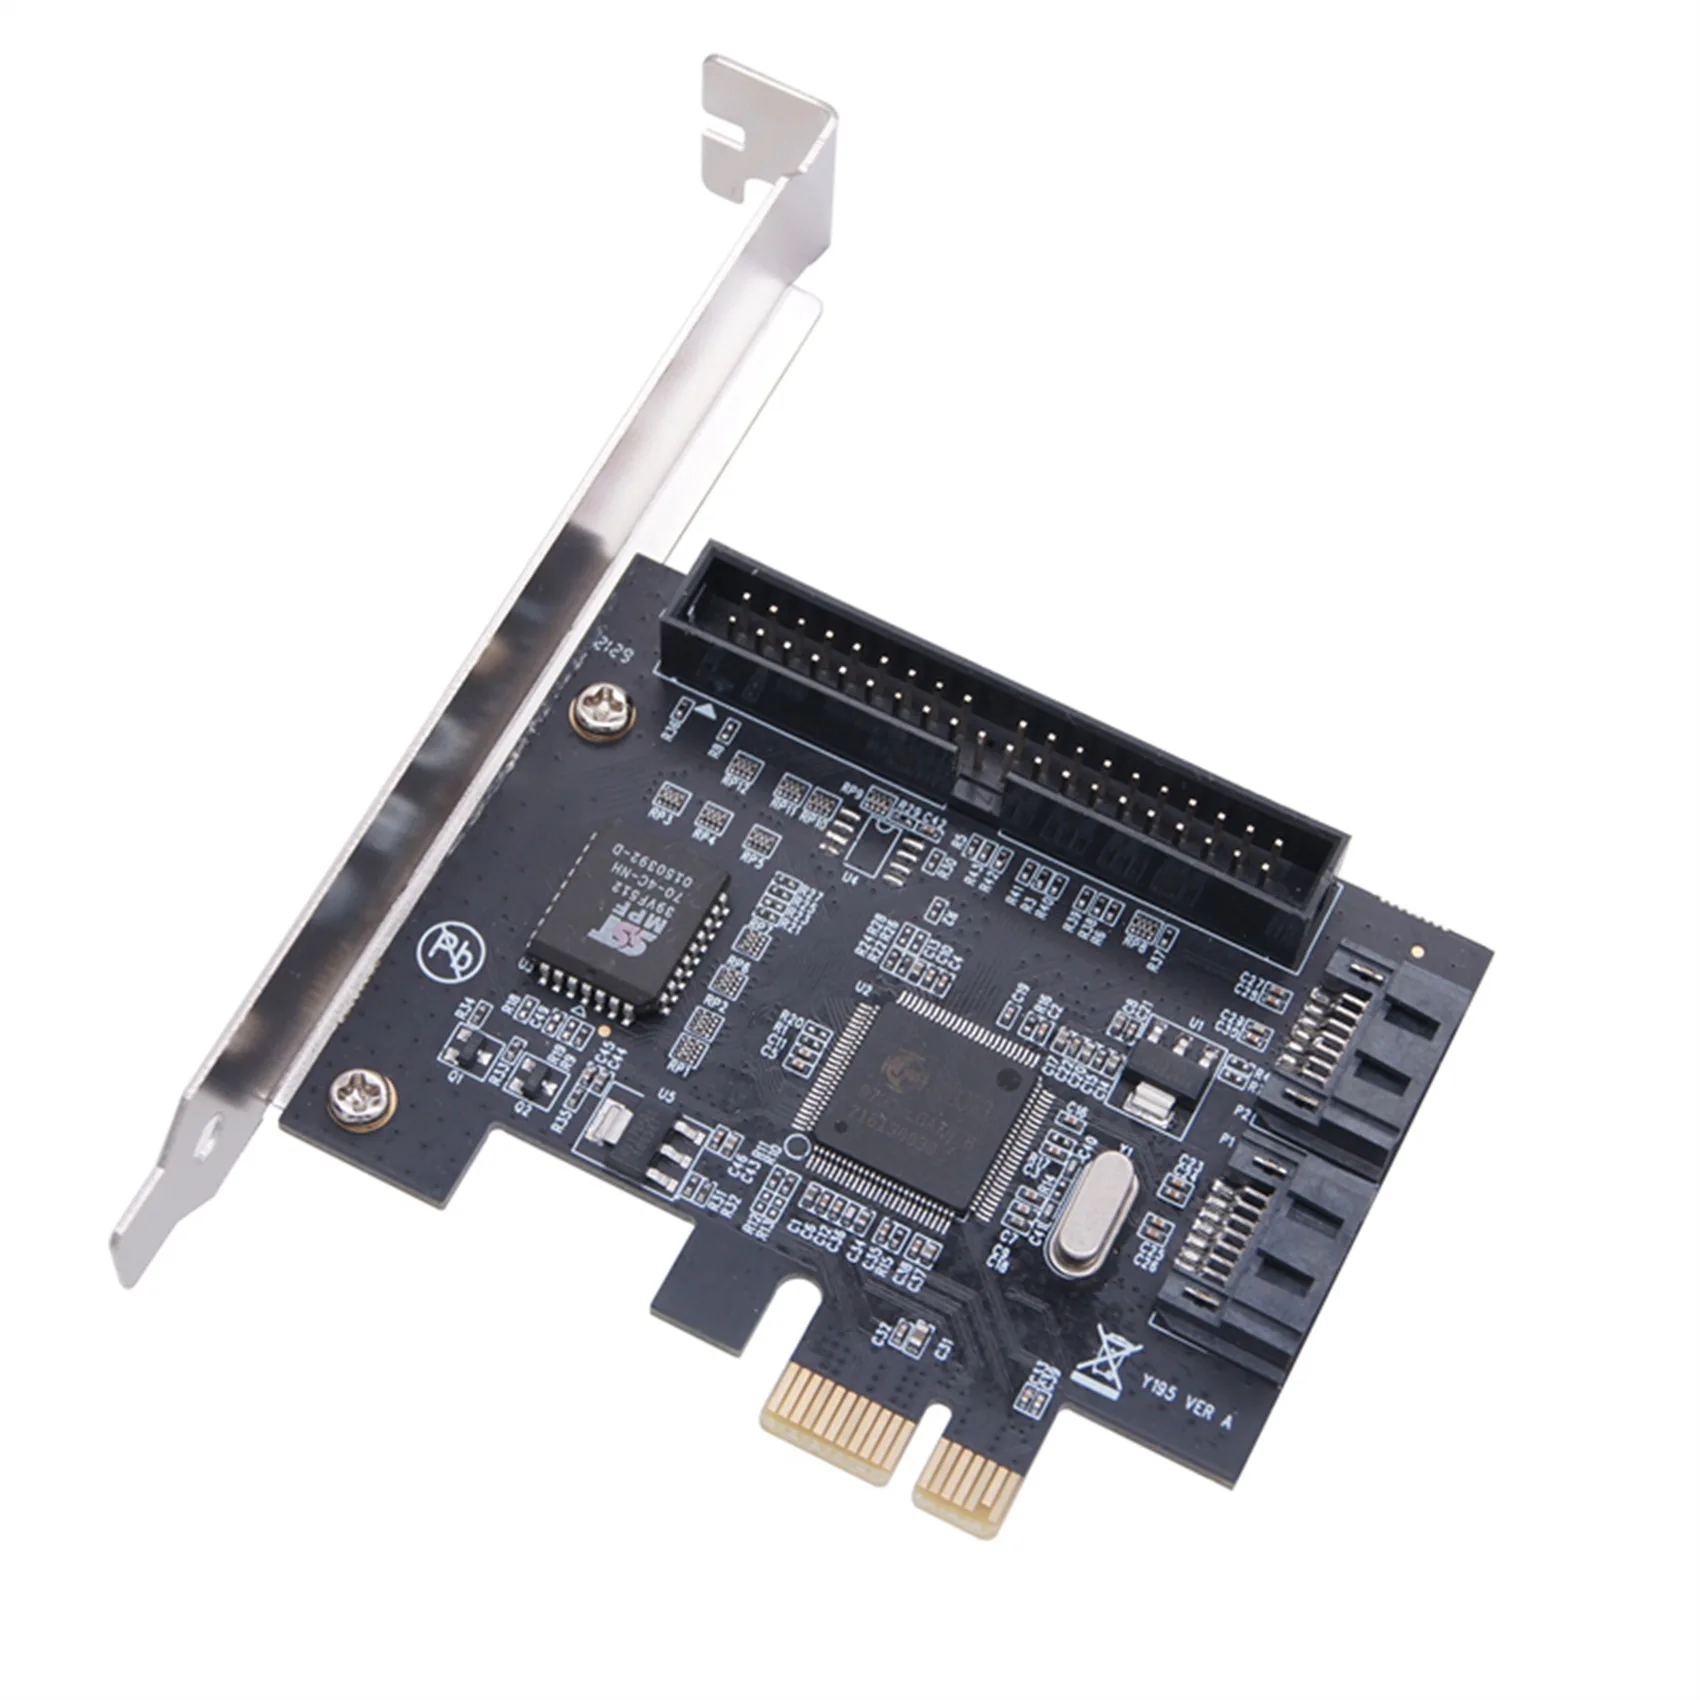 

Desktop PCI E Graphics Card to 2 Port SATA Adapter Card PCI E to SATA IDE Expansion Card 3.5 Inch IDE Adapter Card